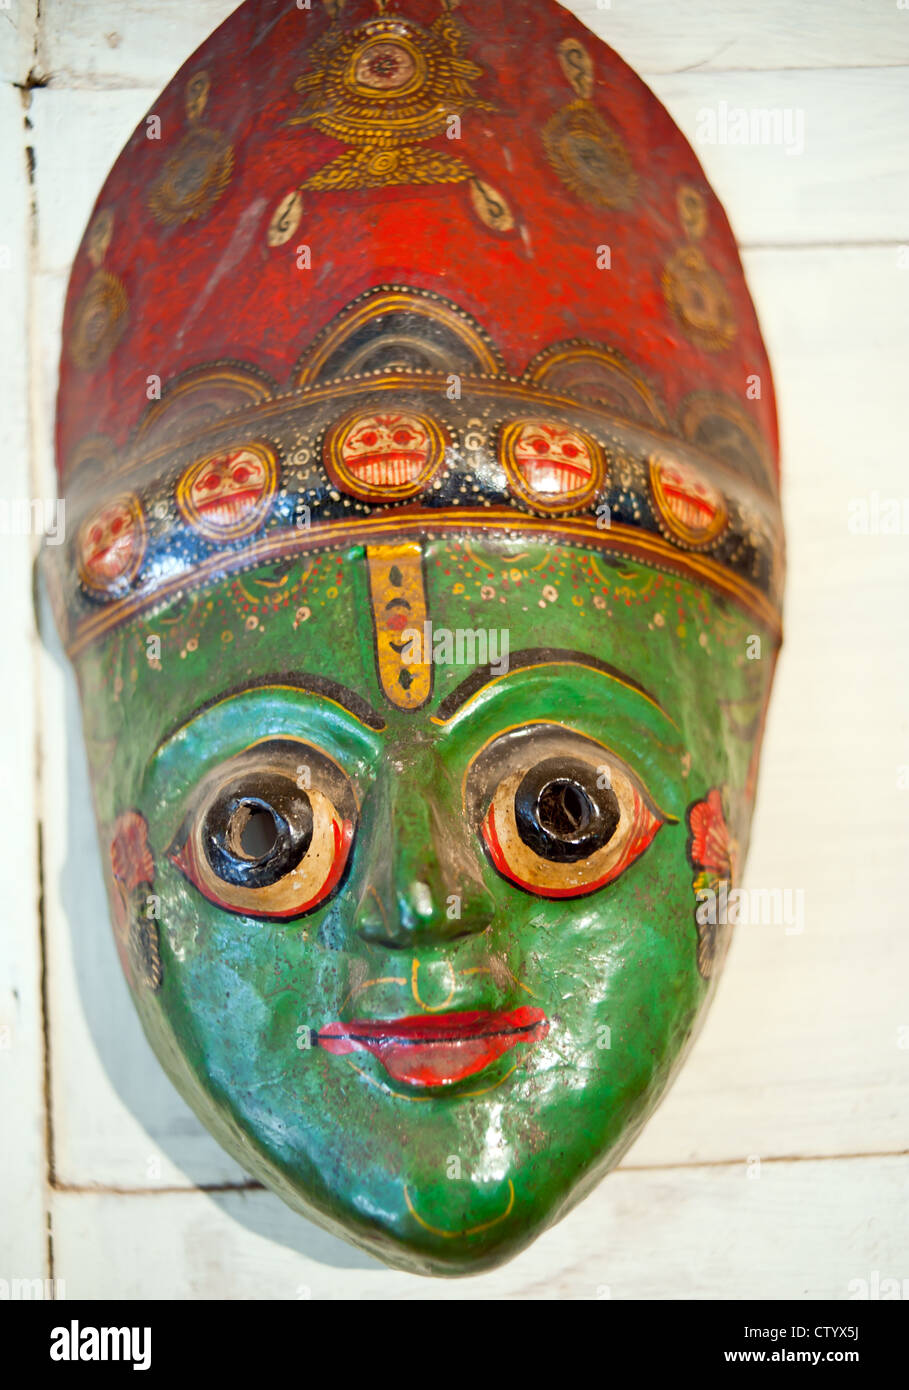 Masks, pottery,souvenirs, hanging in front of the shop, Bhaktapur, Nepal Stock Photo